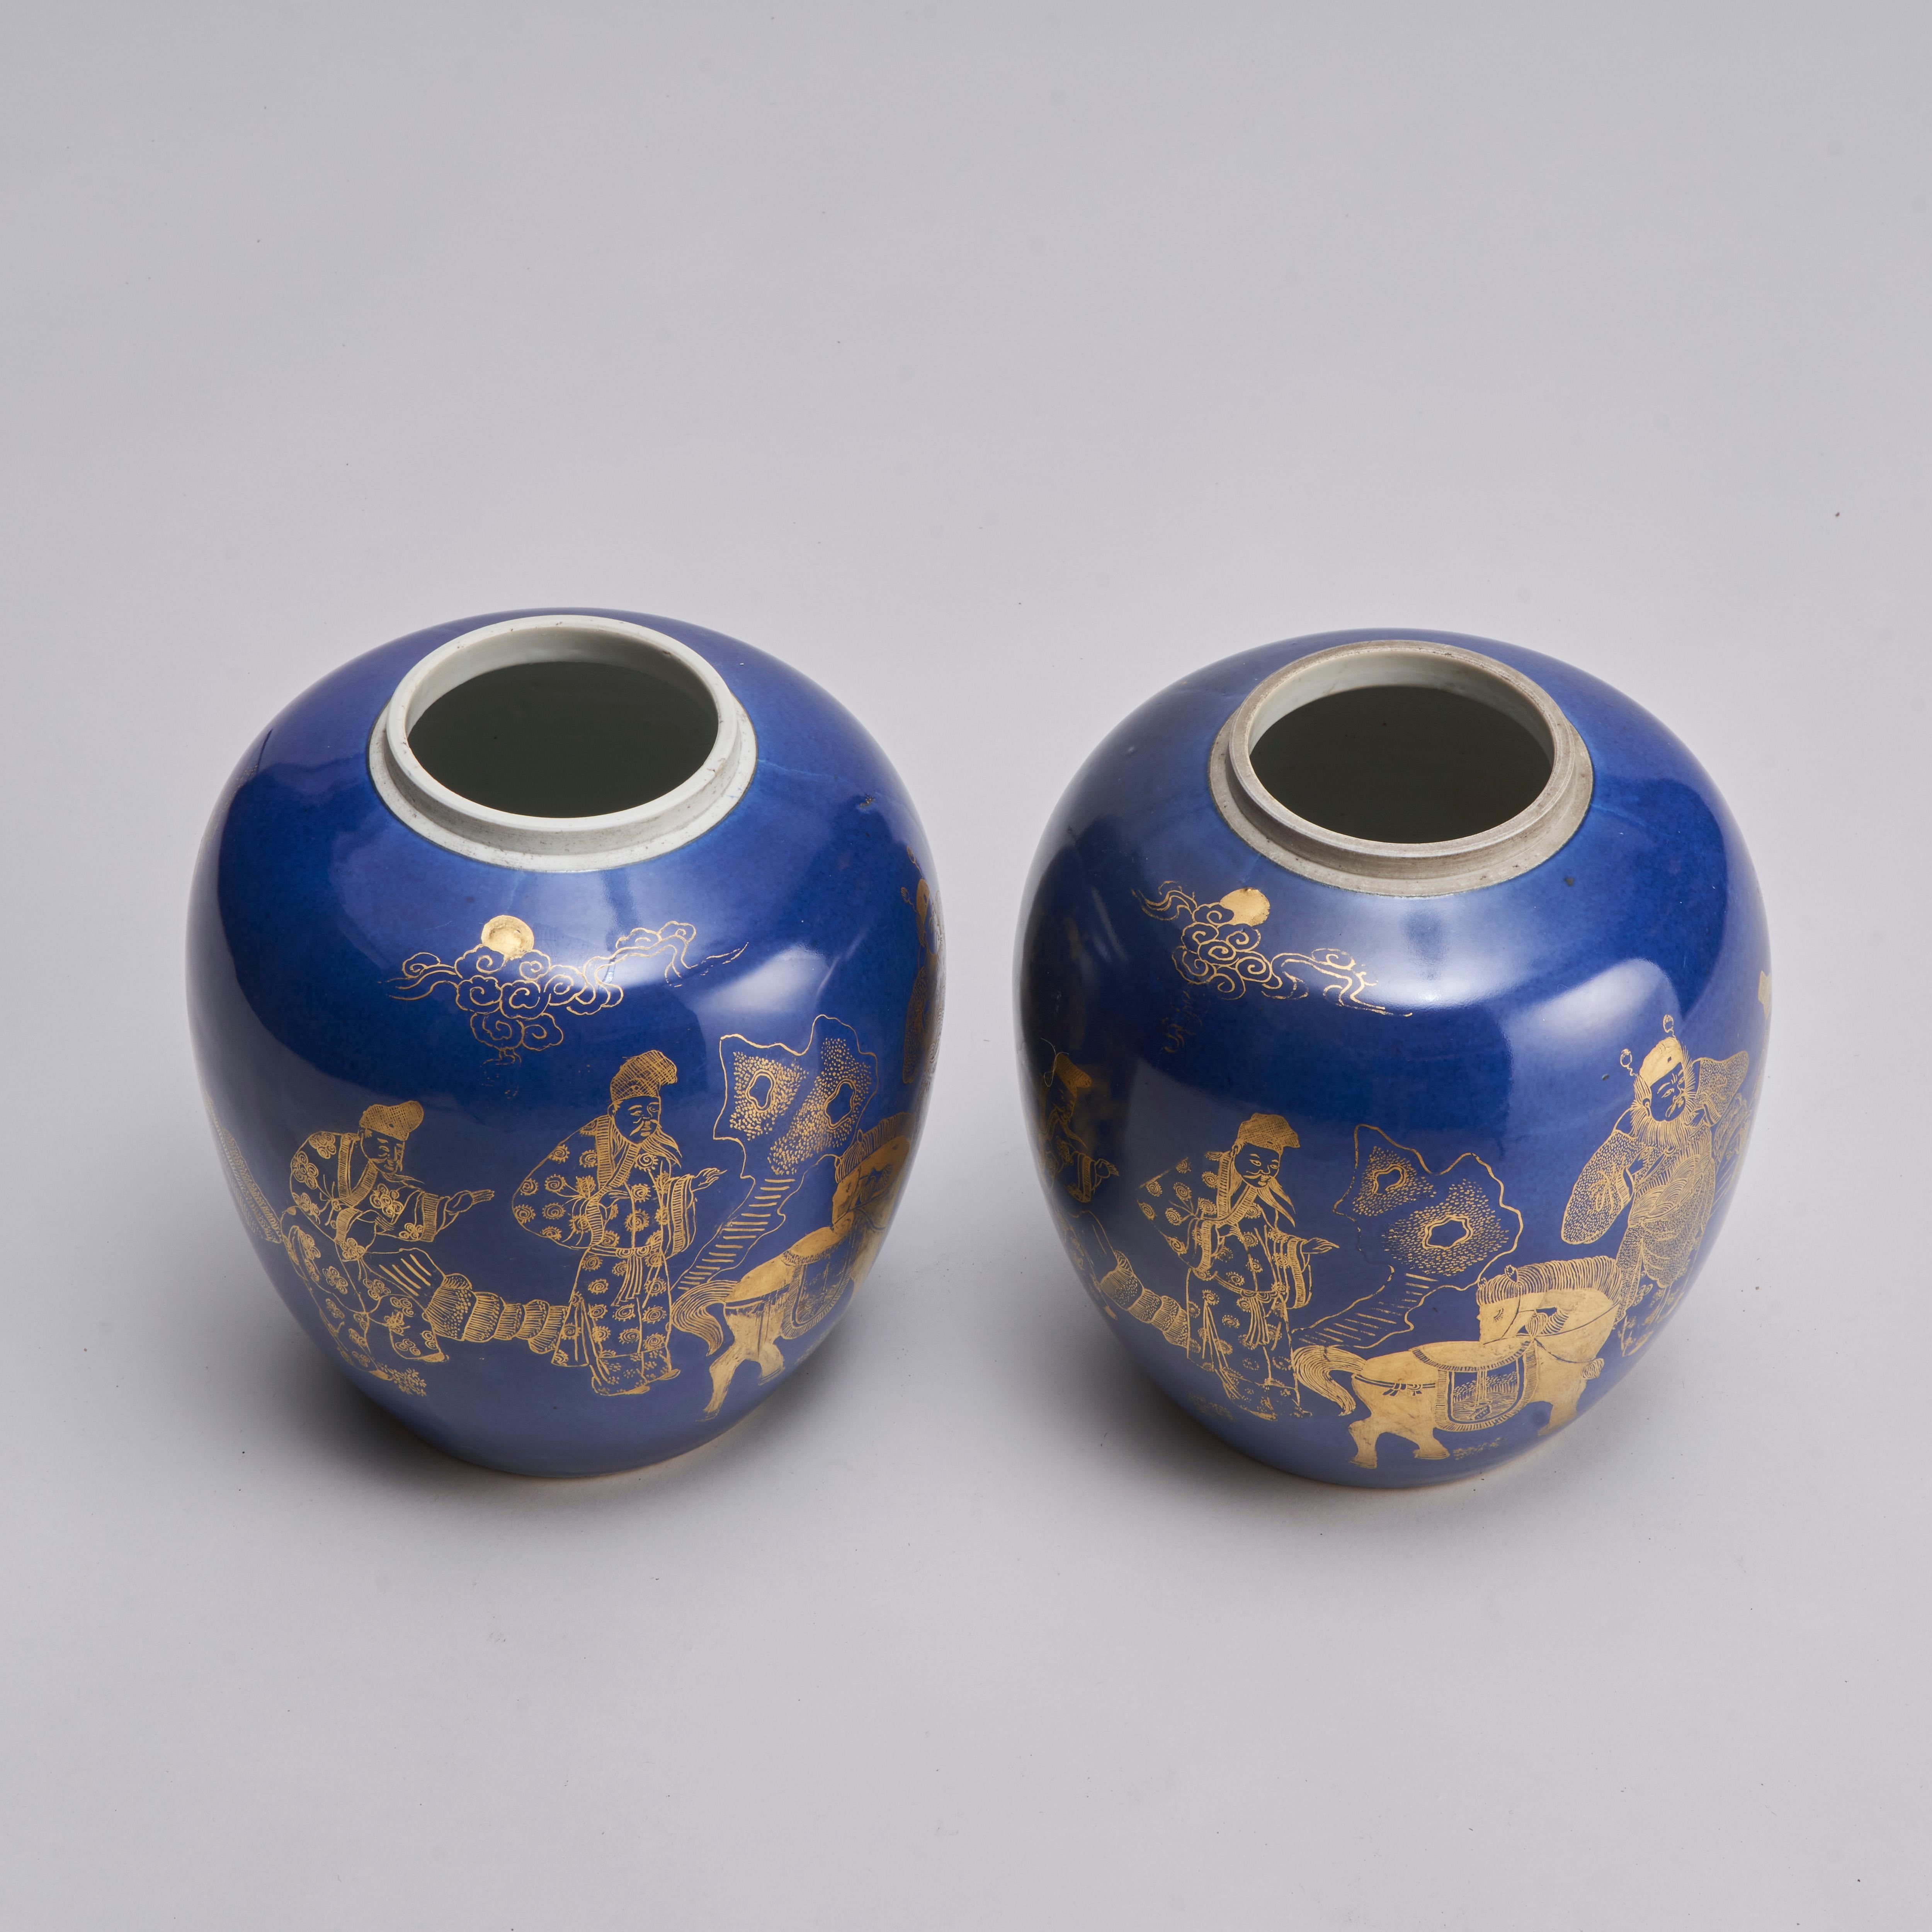 A pair of 19th century Chinese powder blue ginger jars. Both with gold decoration depicting three Scholars consulting a general, likely Guan Yu, seen here with his horse Red Hare.They stand in and ornamental rock garden under full moonlight. Contact